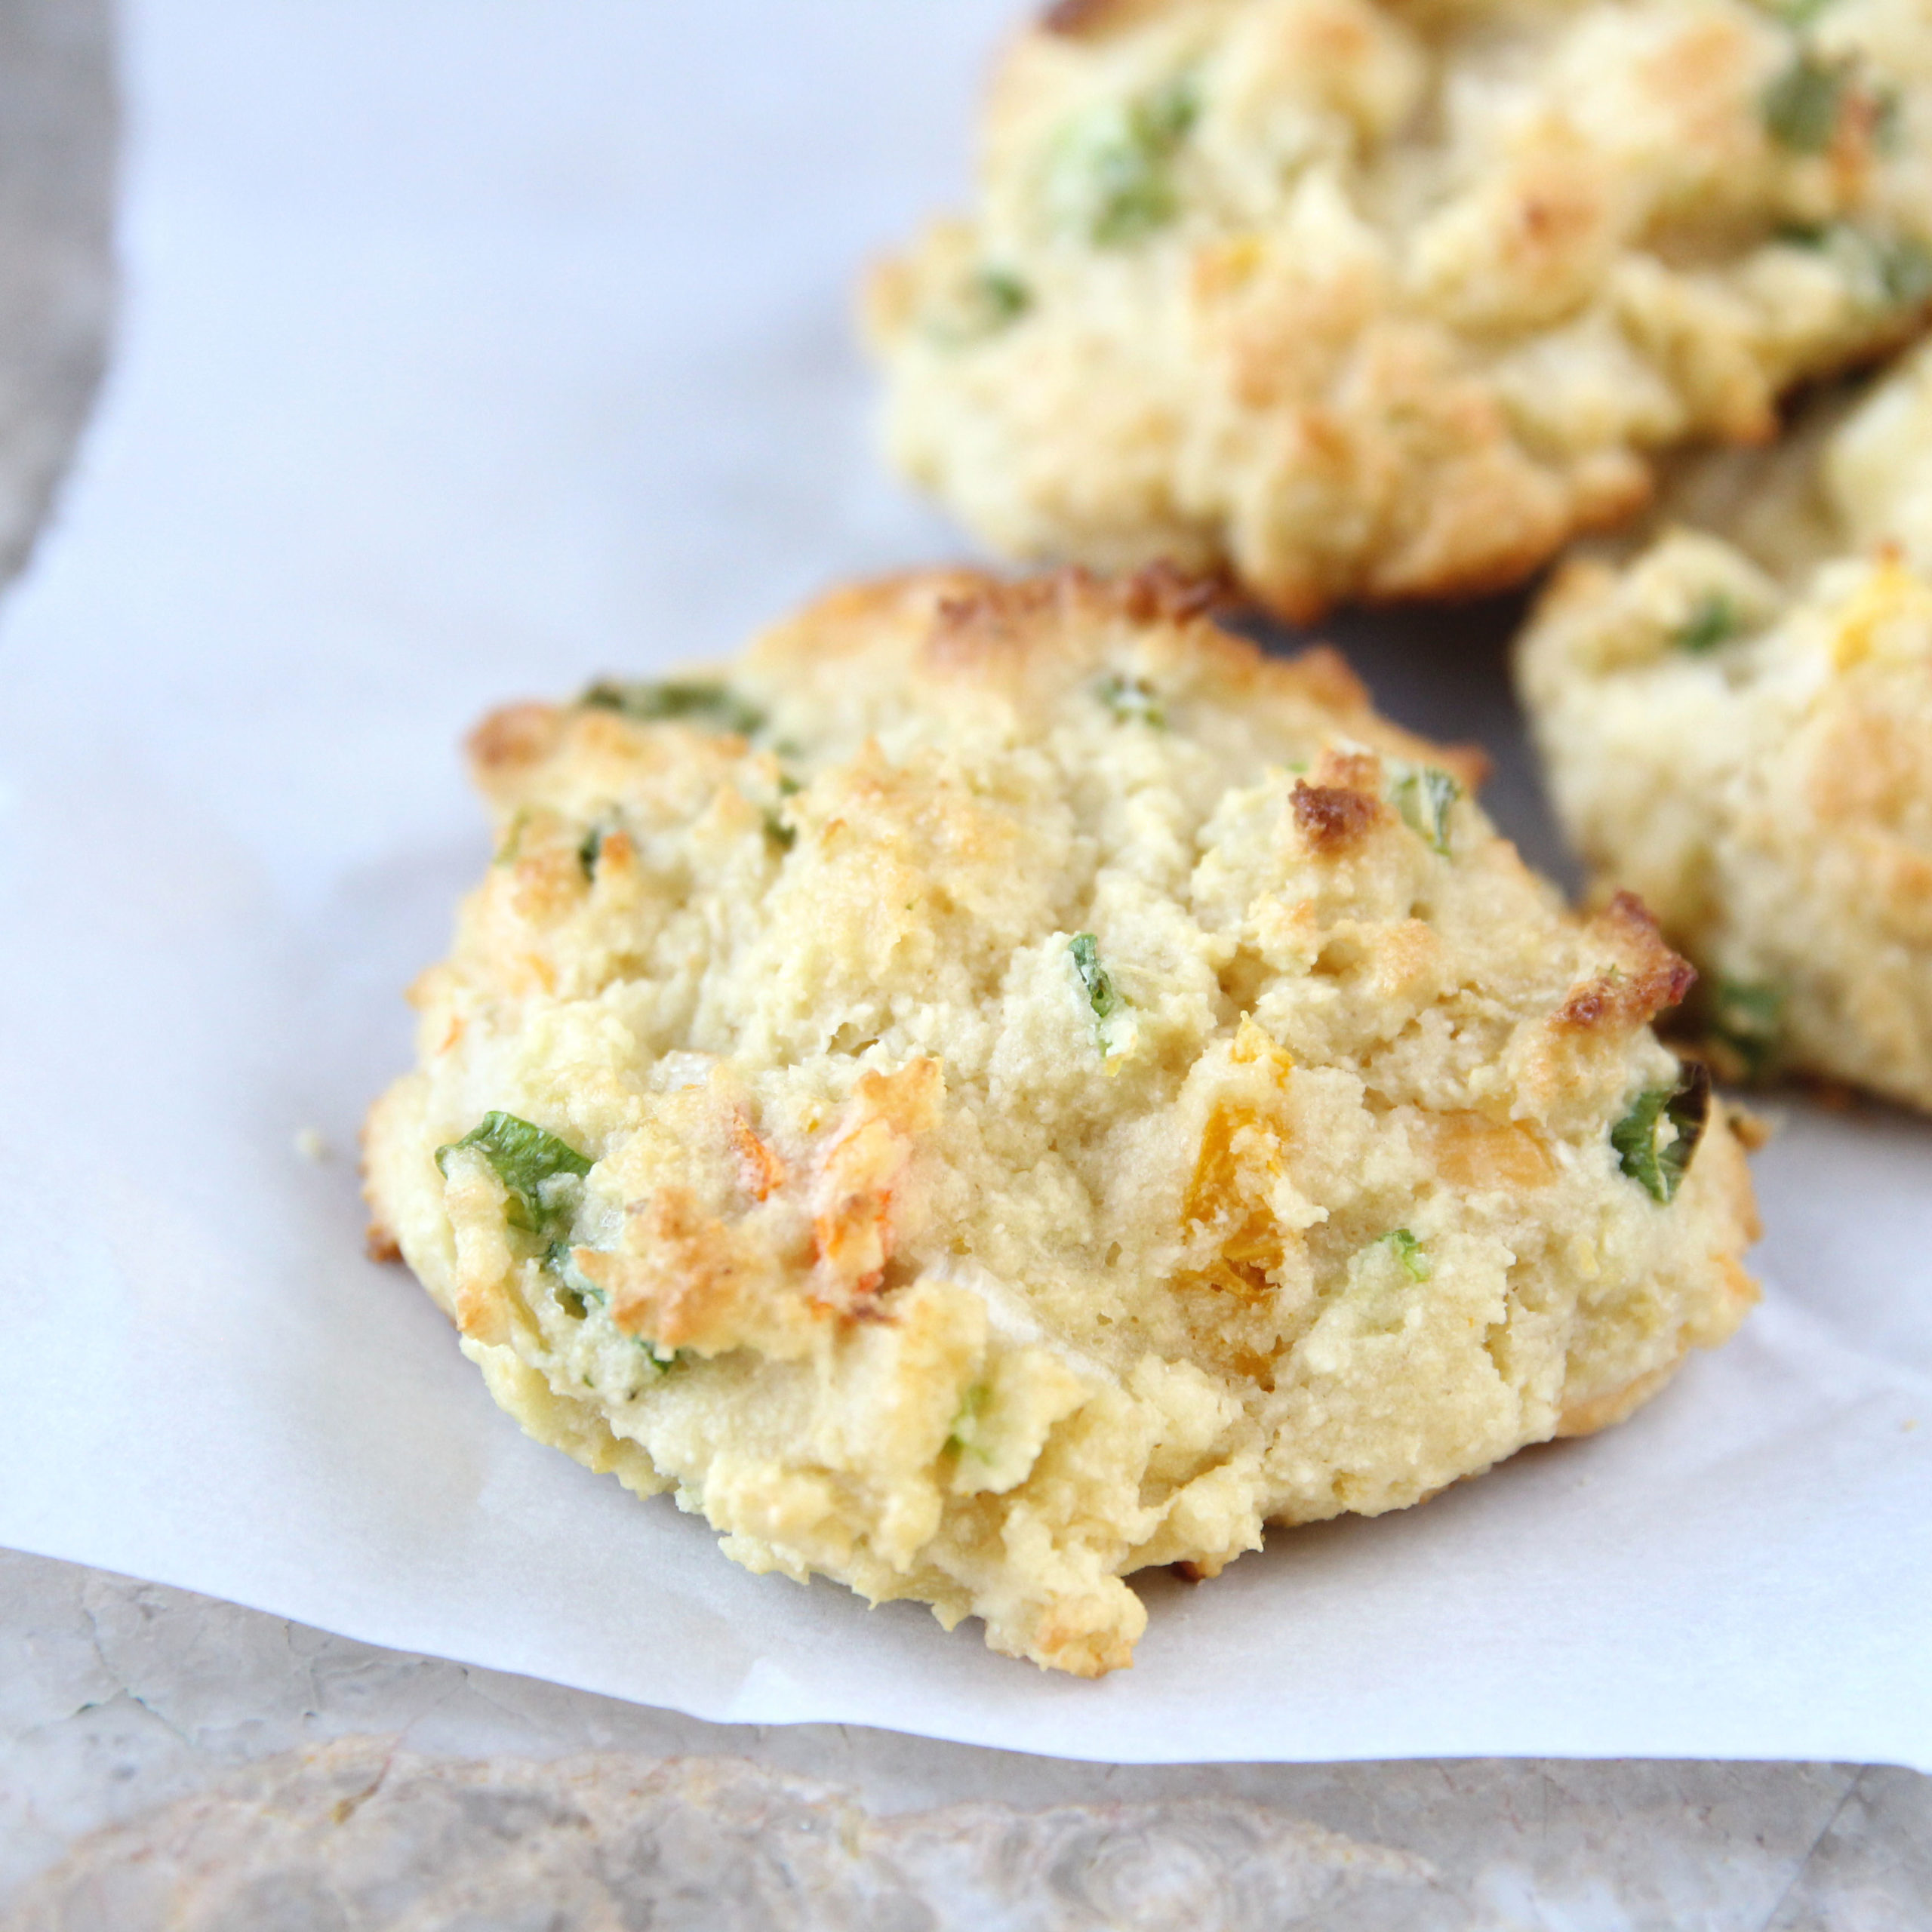 How to Make Gluten-Free Cheddar Drop Biscuits made with Cauliflower - avocado conut